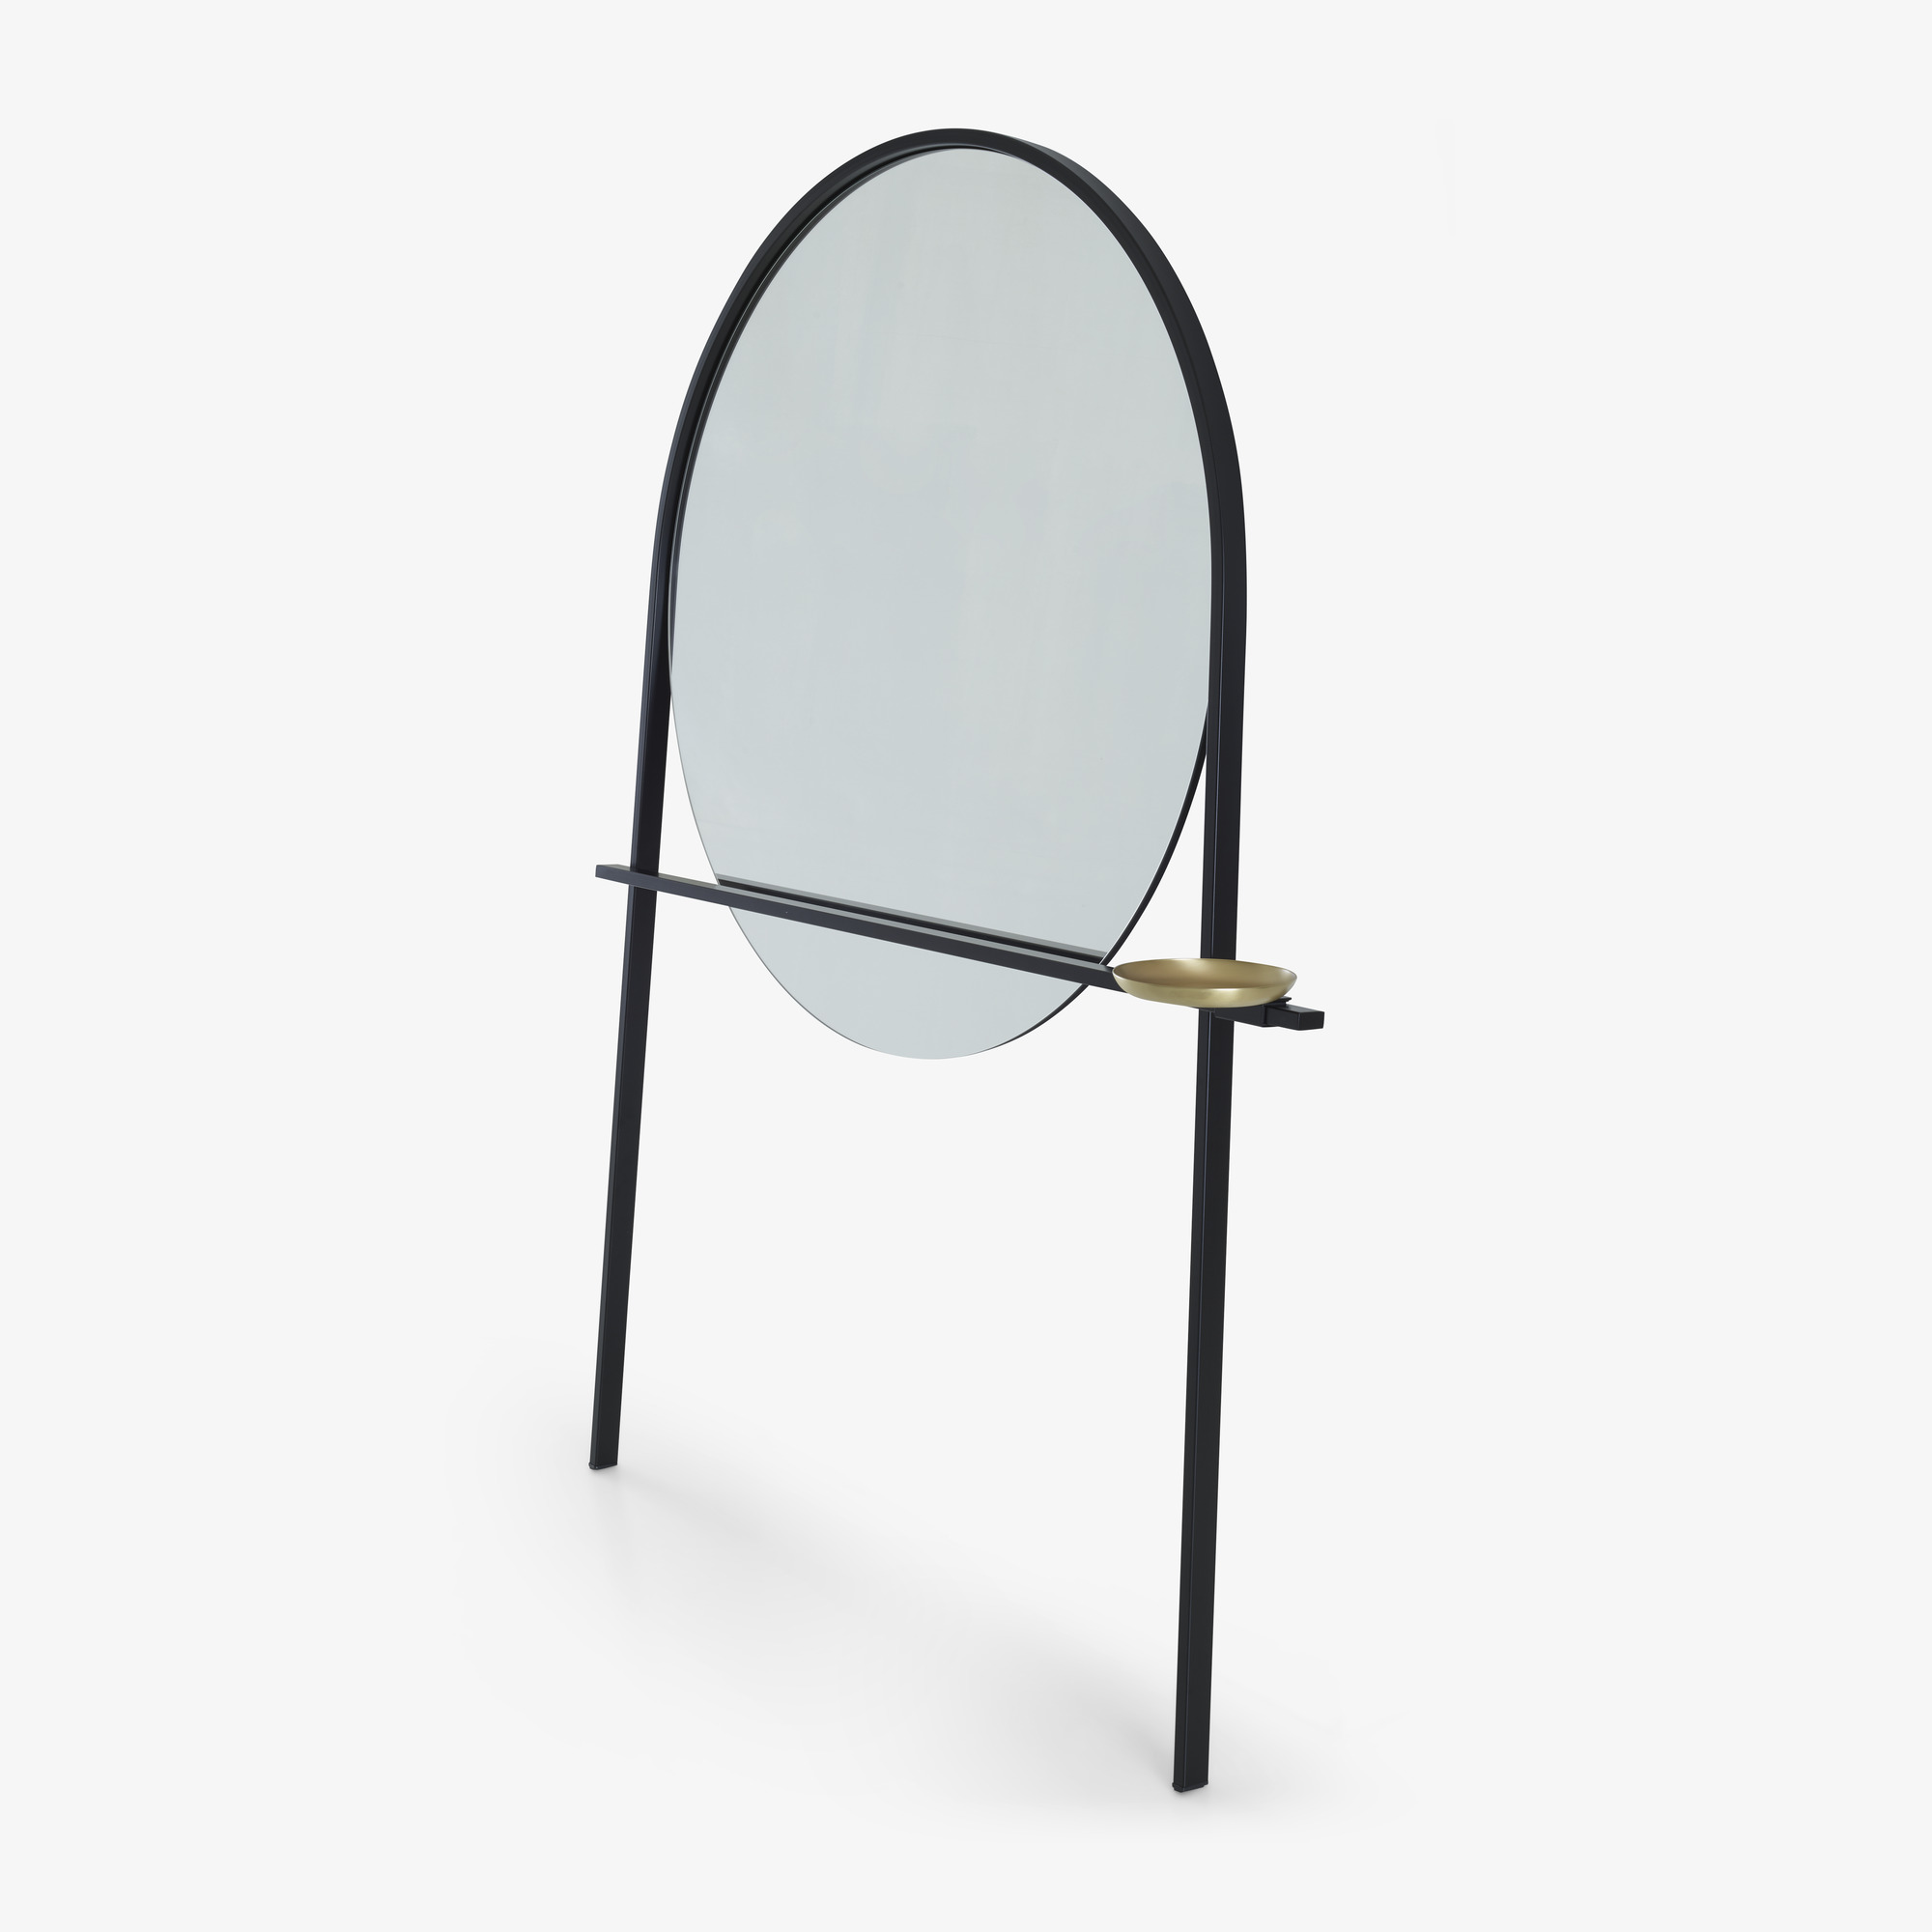 Image Mirror / clothes stand   2